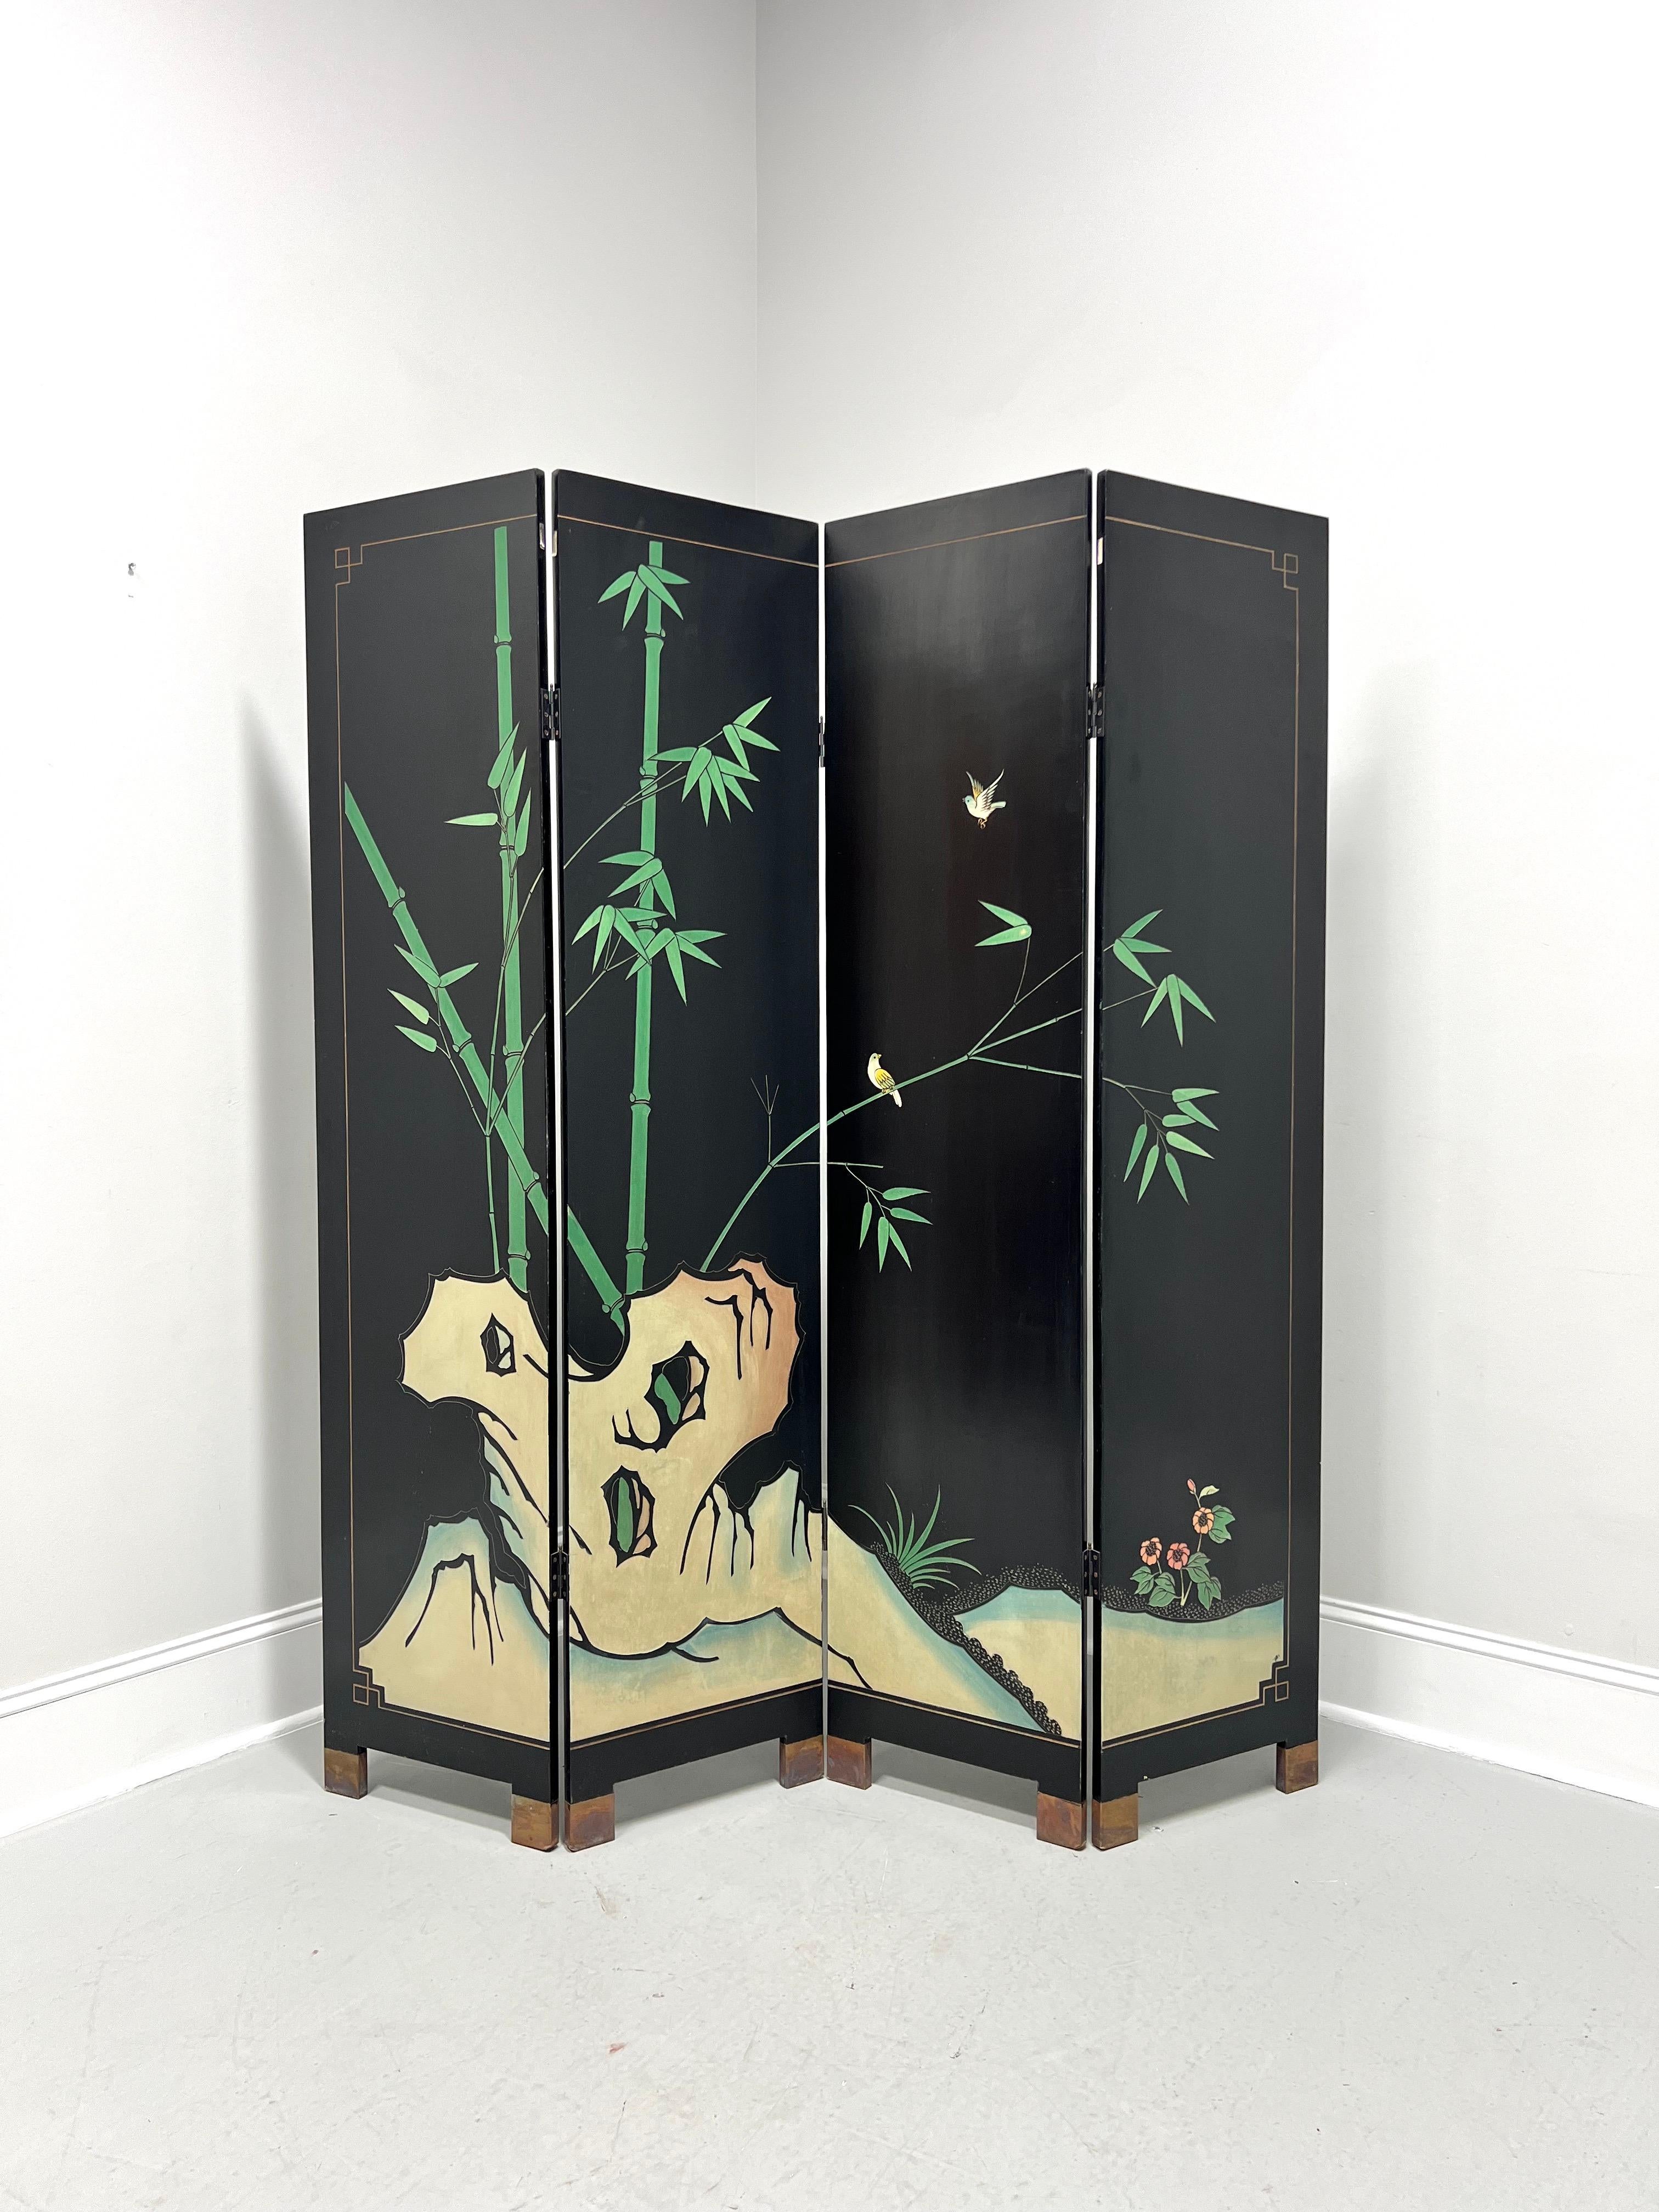 A hand painted Chinese Export Asian style four-panel folding screen room divider, artisan unknown. Solid wood with Coromandel black lacquer, front and reverse sides both having hand painted Chinoiserie scenes that blend across the four panels. The